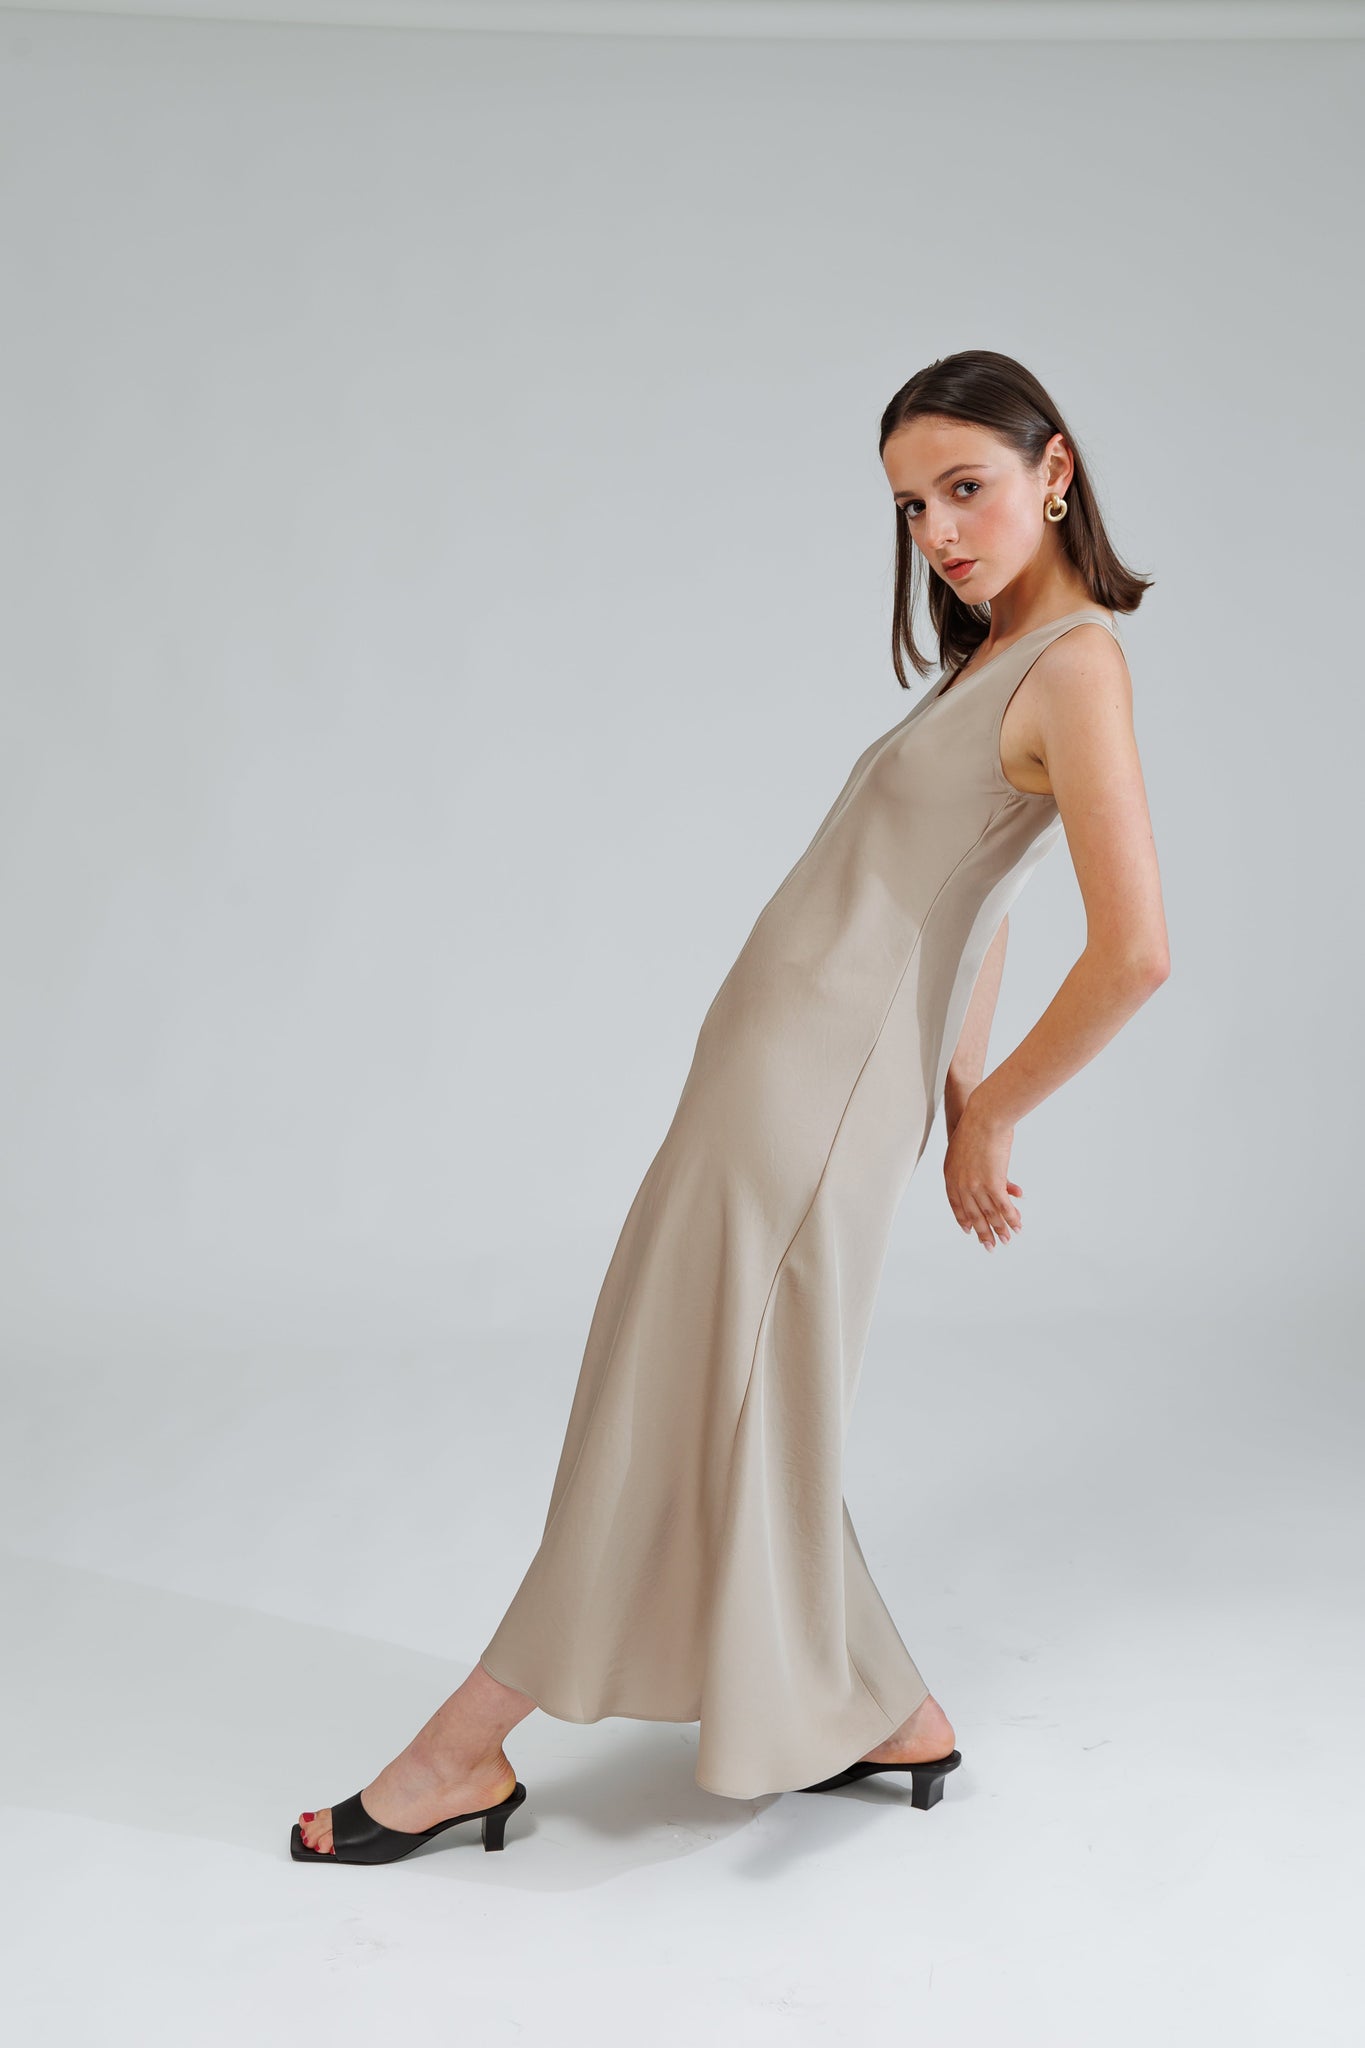 NIXIE DRESS IN ICY LATTE - interlue